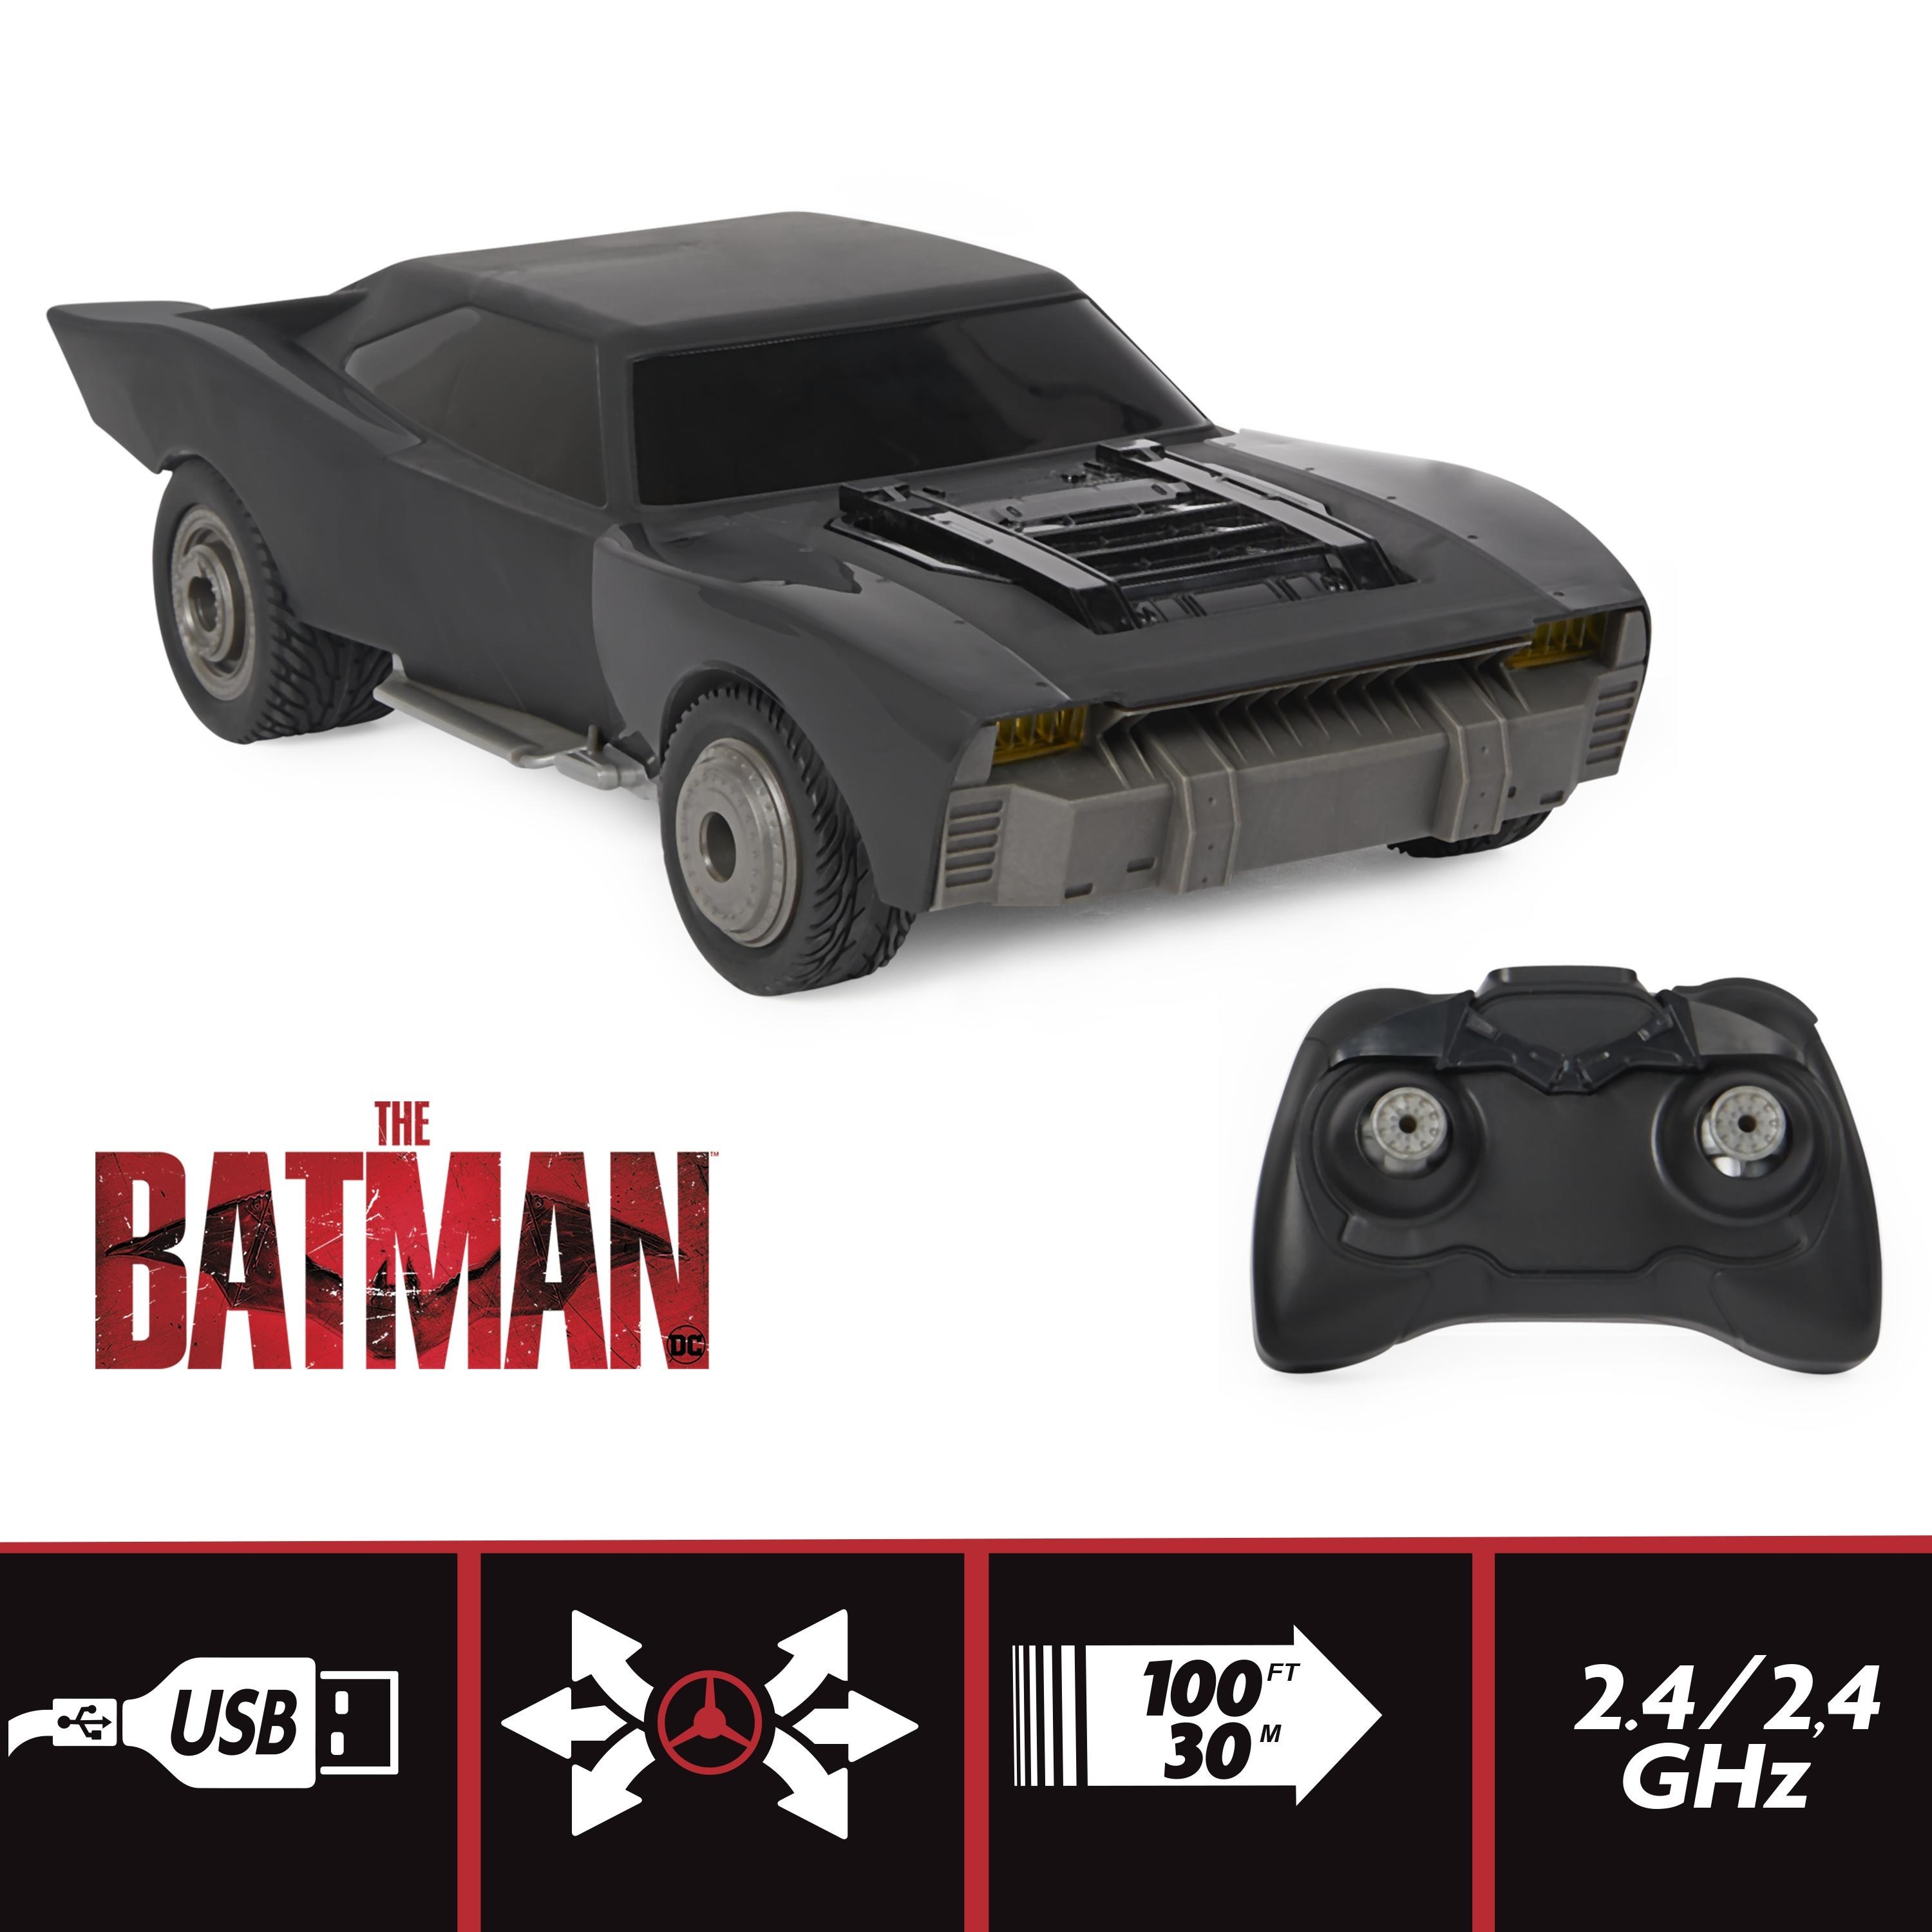 We see the Turbo Boost Batmobile™ RC with the controller.